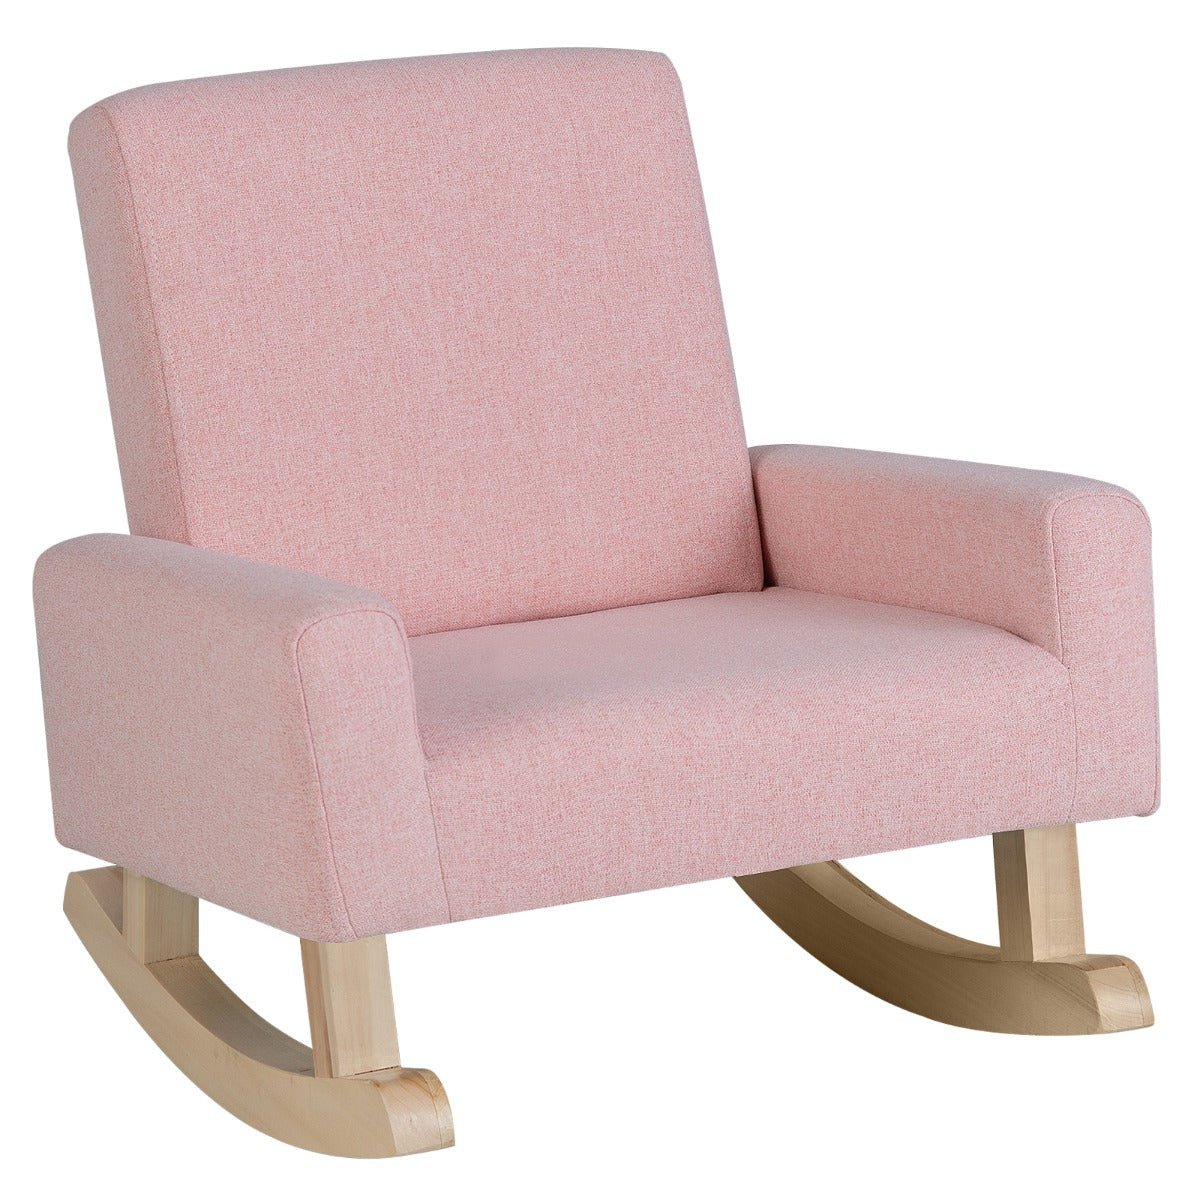 Pink Kids Rocking Chair - Wood Legs, Anti-tipping Design for Safe Play